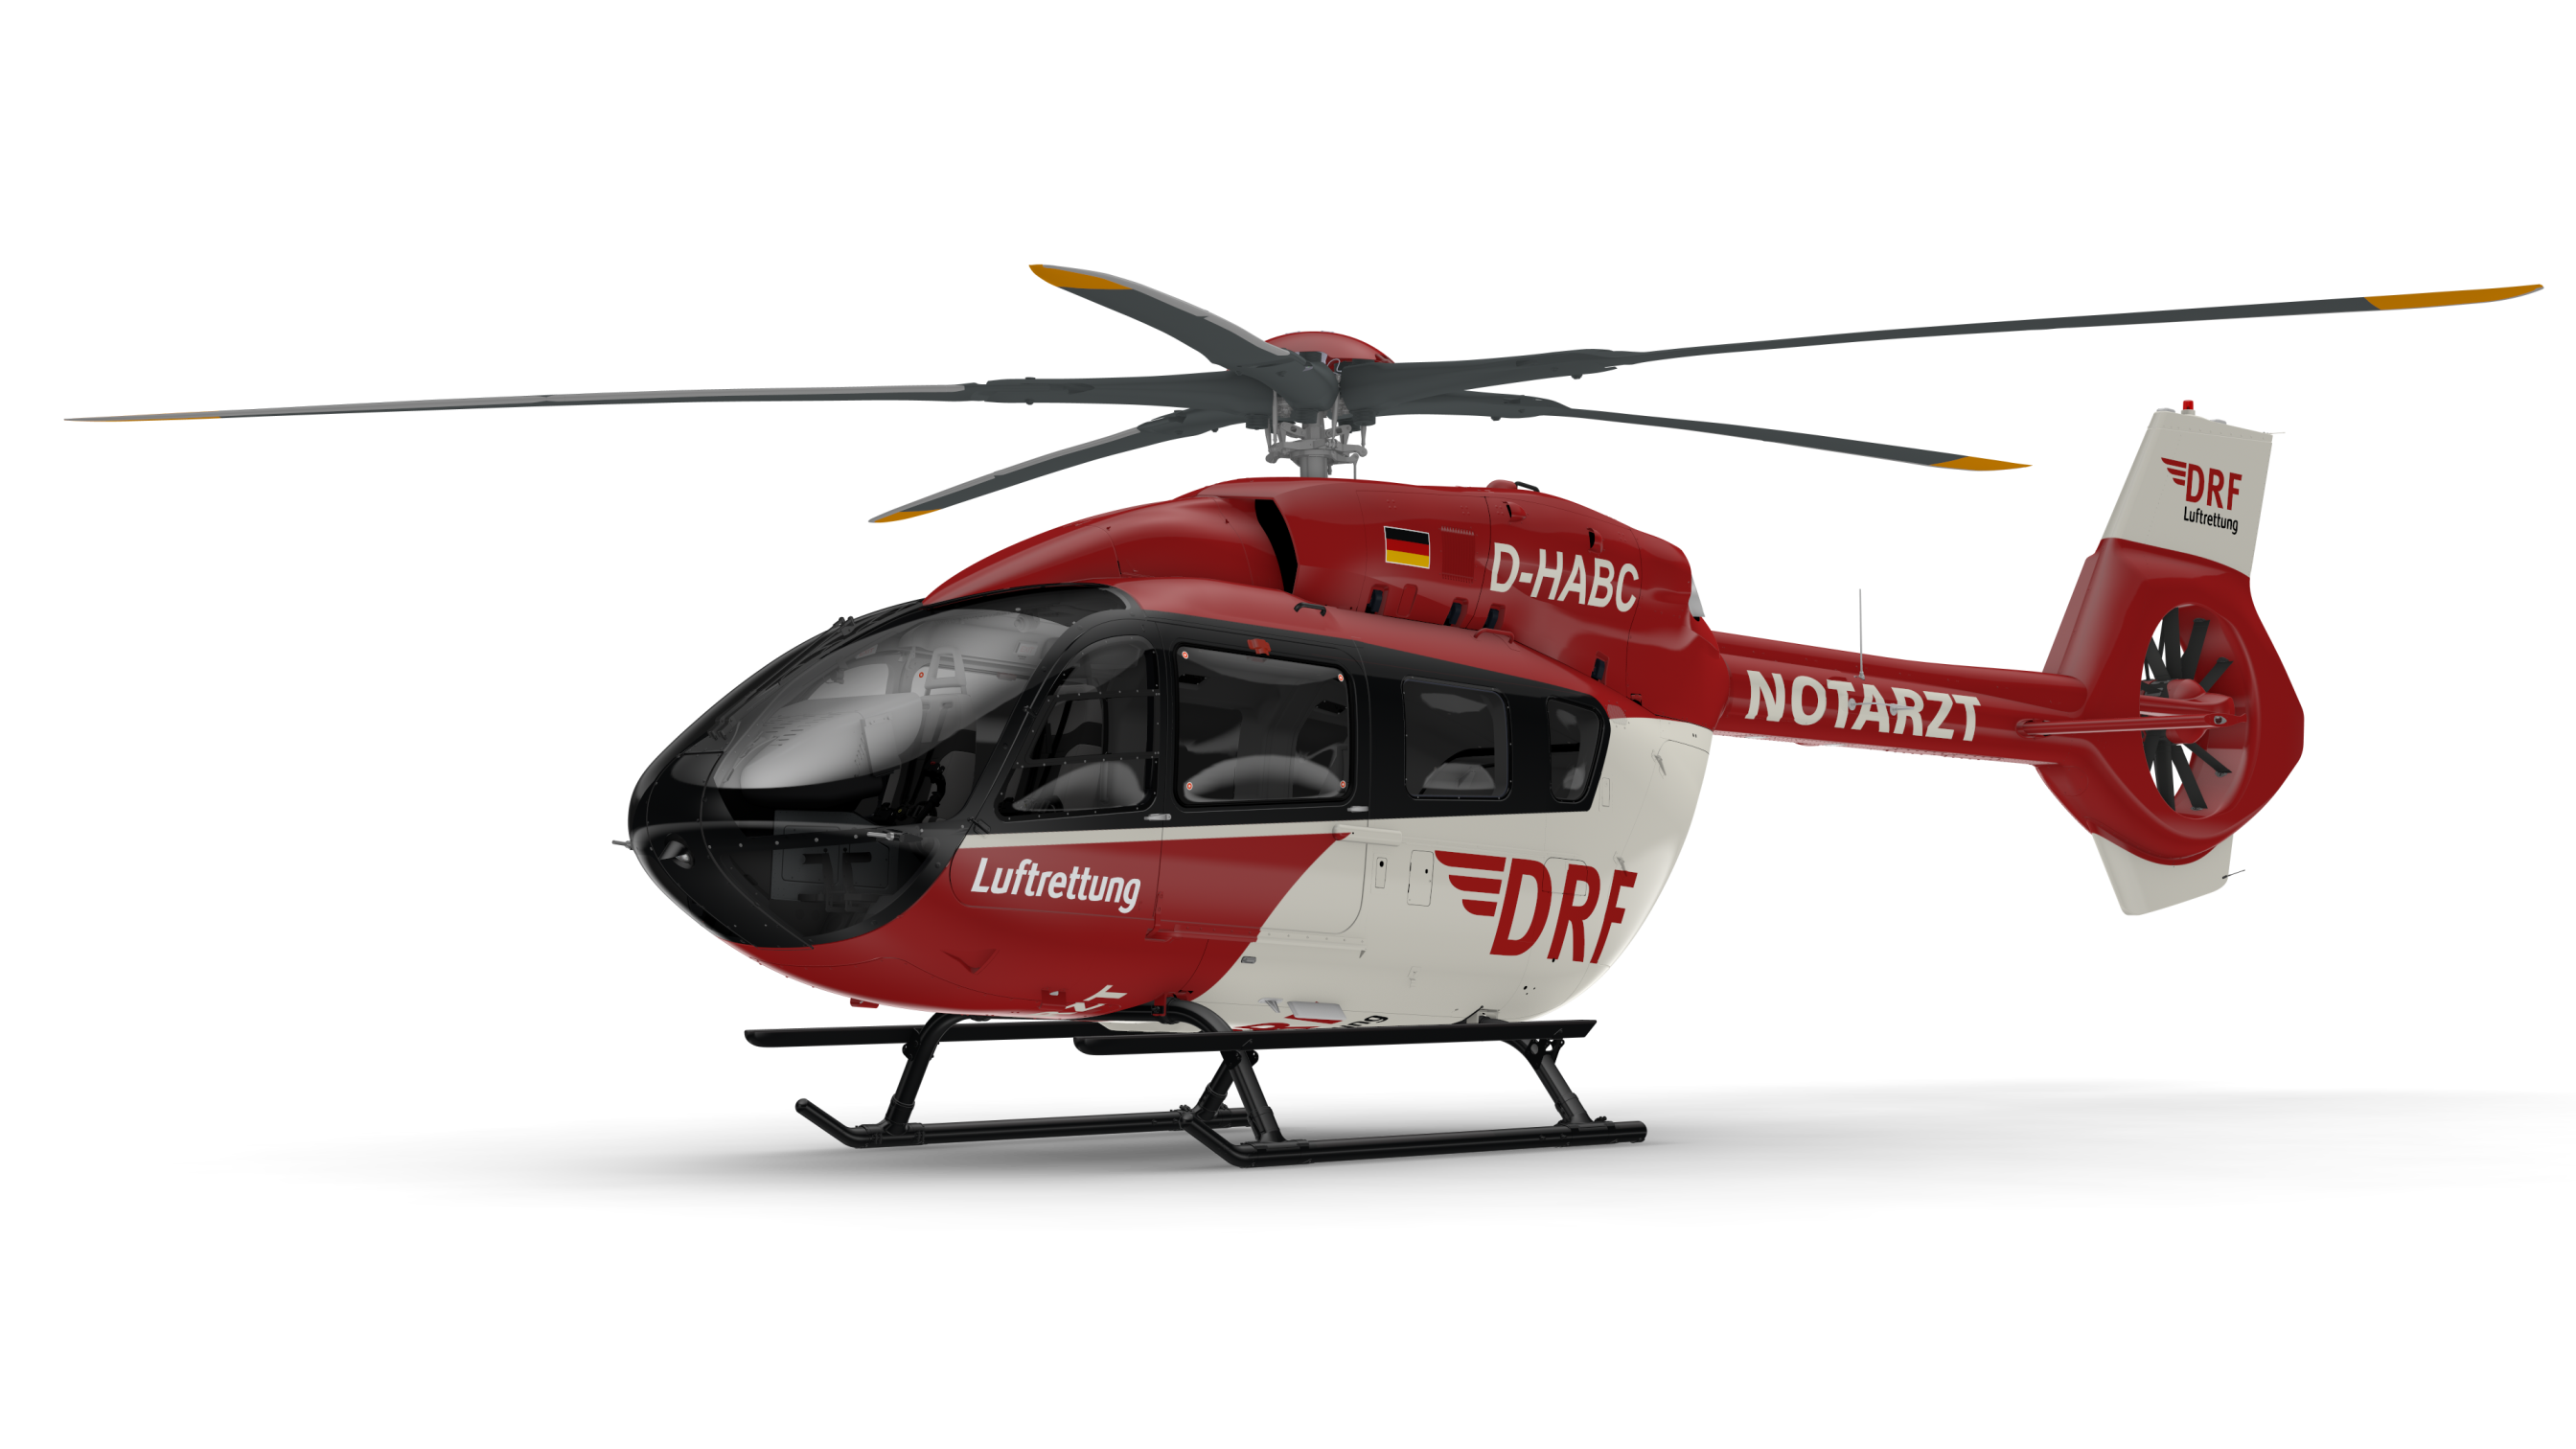 DRF(c)Airbus Helicopters